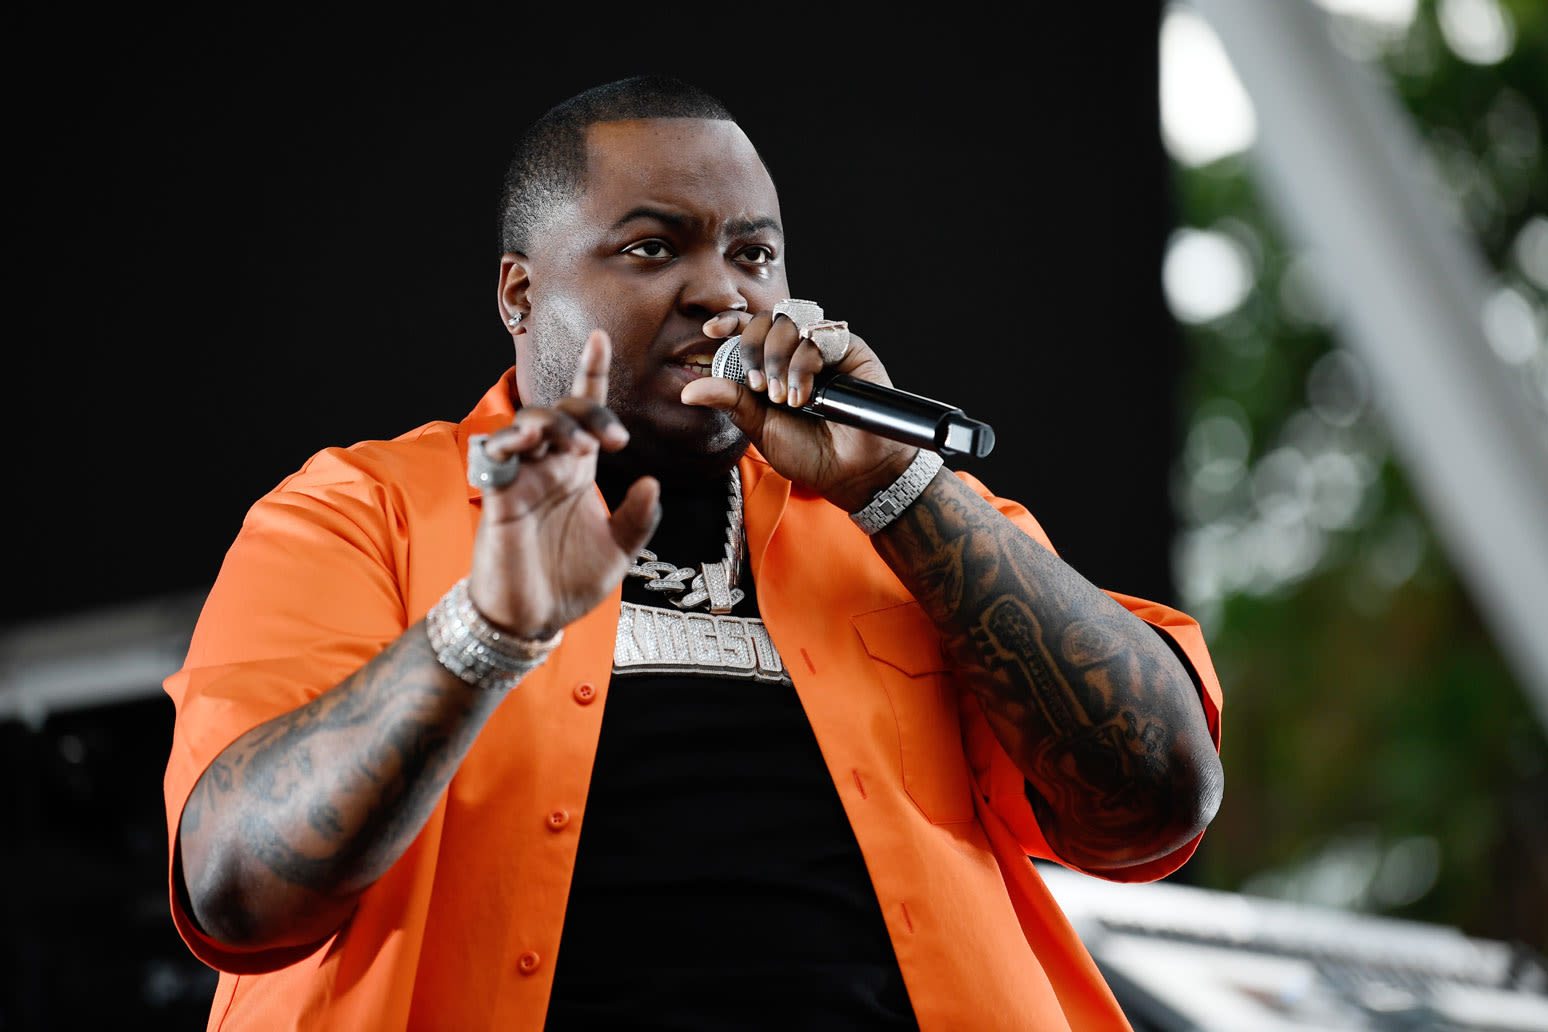 Sean Kingston Arrested on Fraud Charges in California Following Florida Home Raid